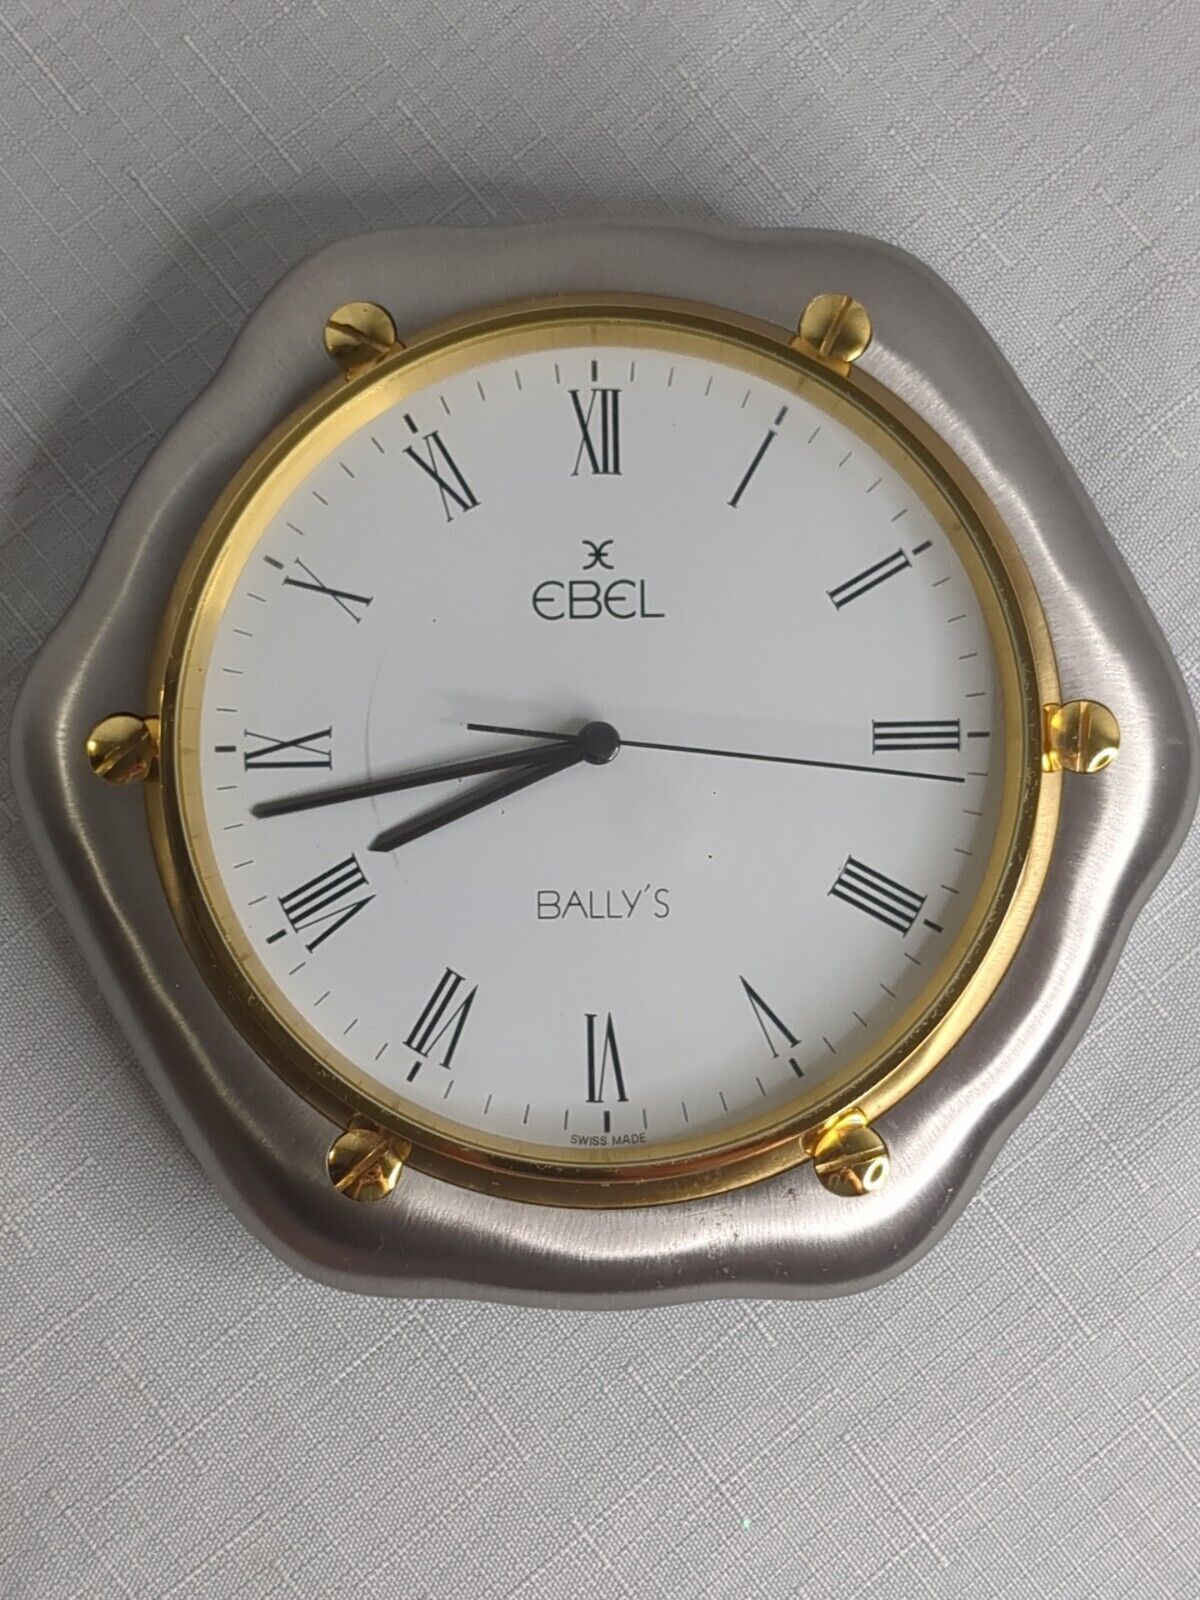 EBEL Desk Counter Wall Display Clock Swiss Dealer Bally\'s Promo Tested Working